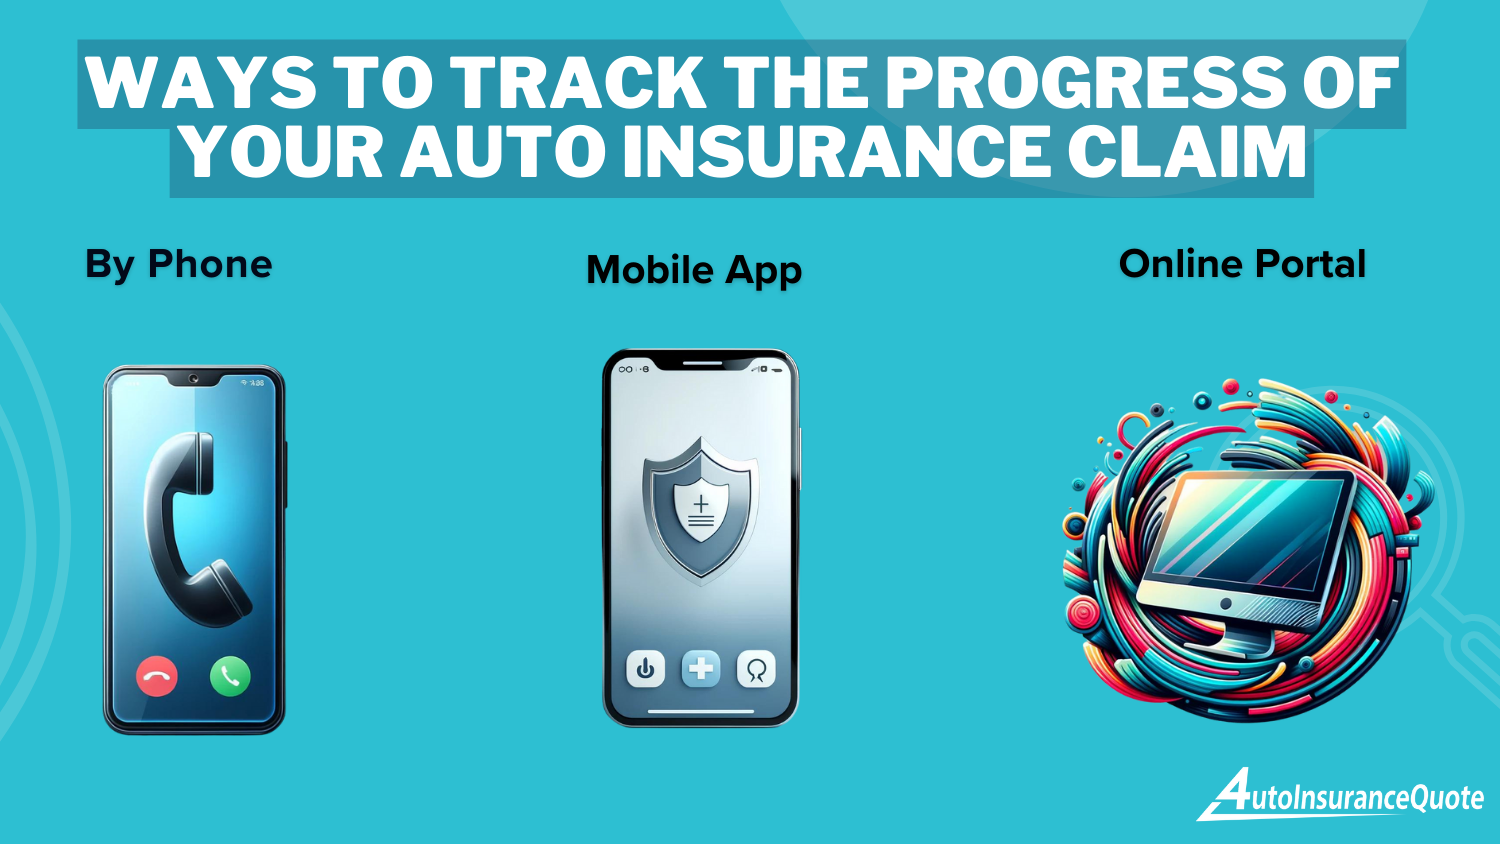 How to Track the Progress of Your Geico Auto Insurance Claim: Ways to Track the Progress of Your Auto Insurance Claim Infographic